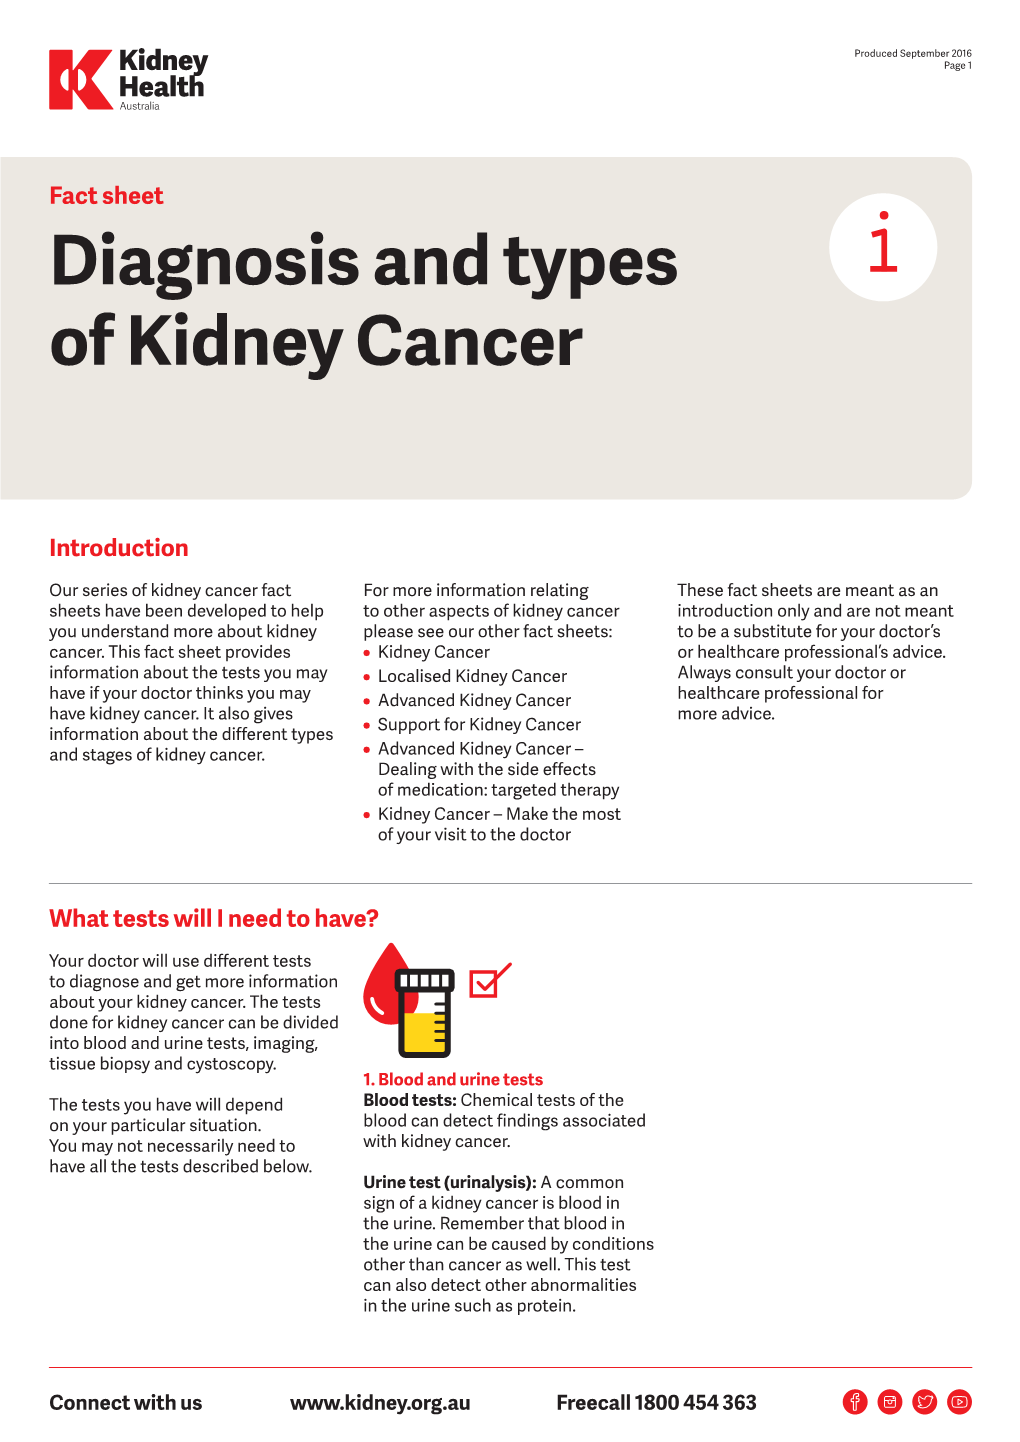 Diagnosis and Types of Kidney Cancer